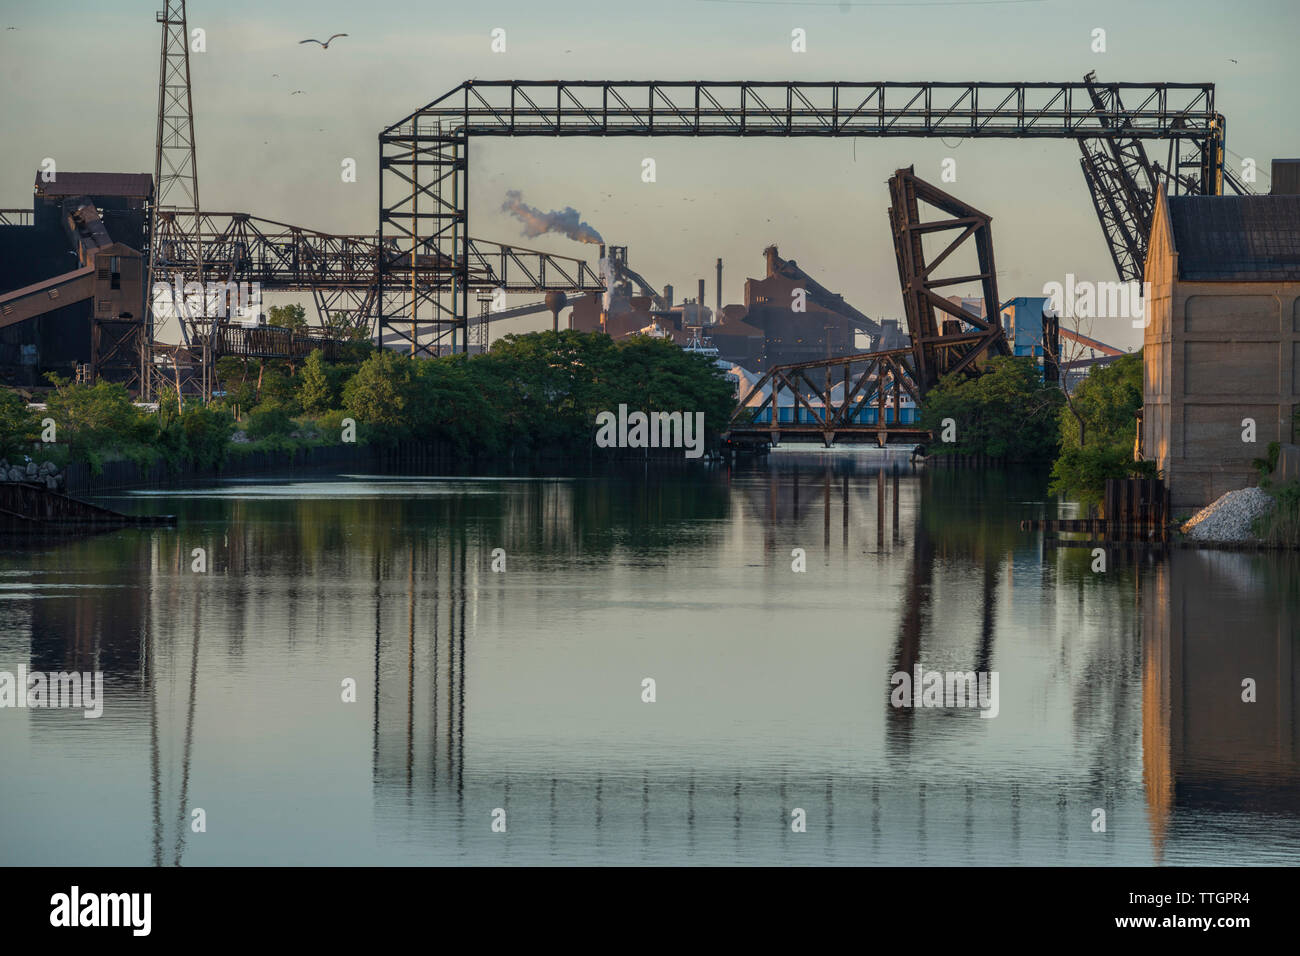 Steel Mill, Grand Calumet River, East Chicago, Indiana Stock Photo